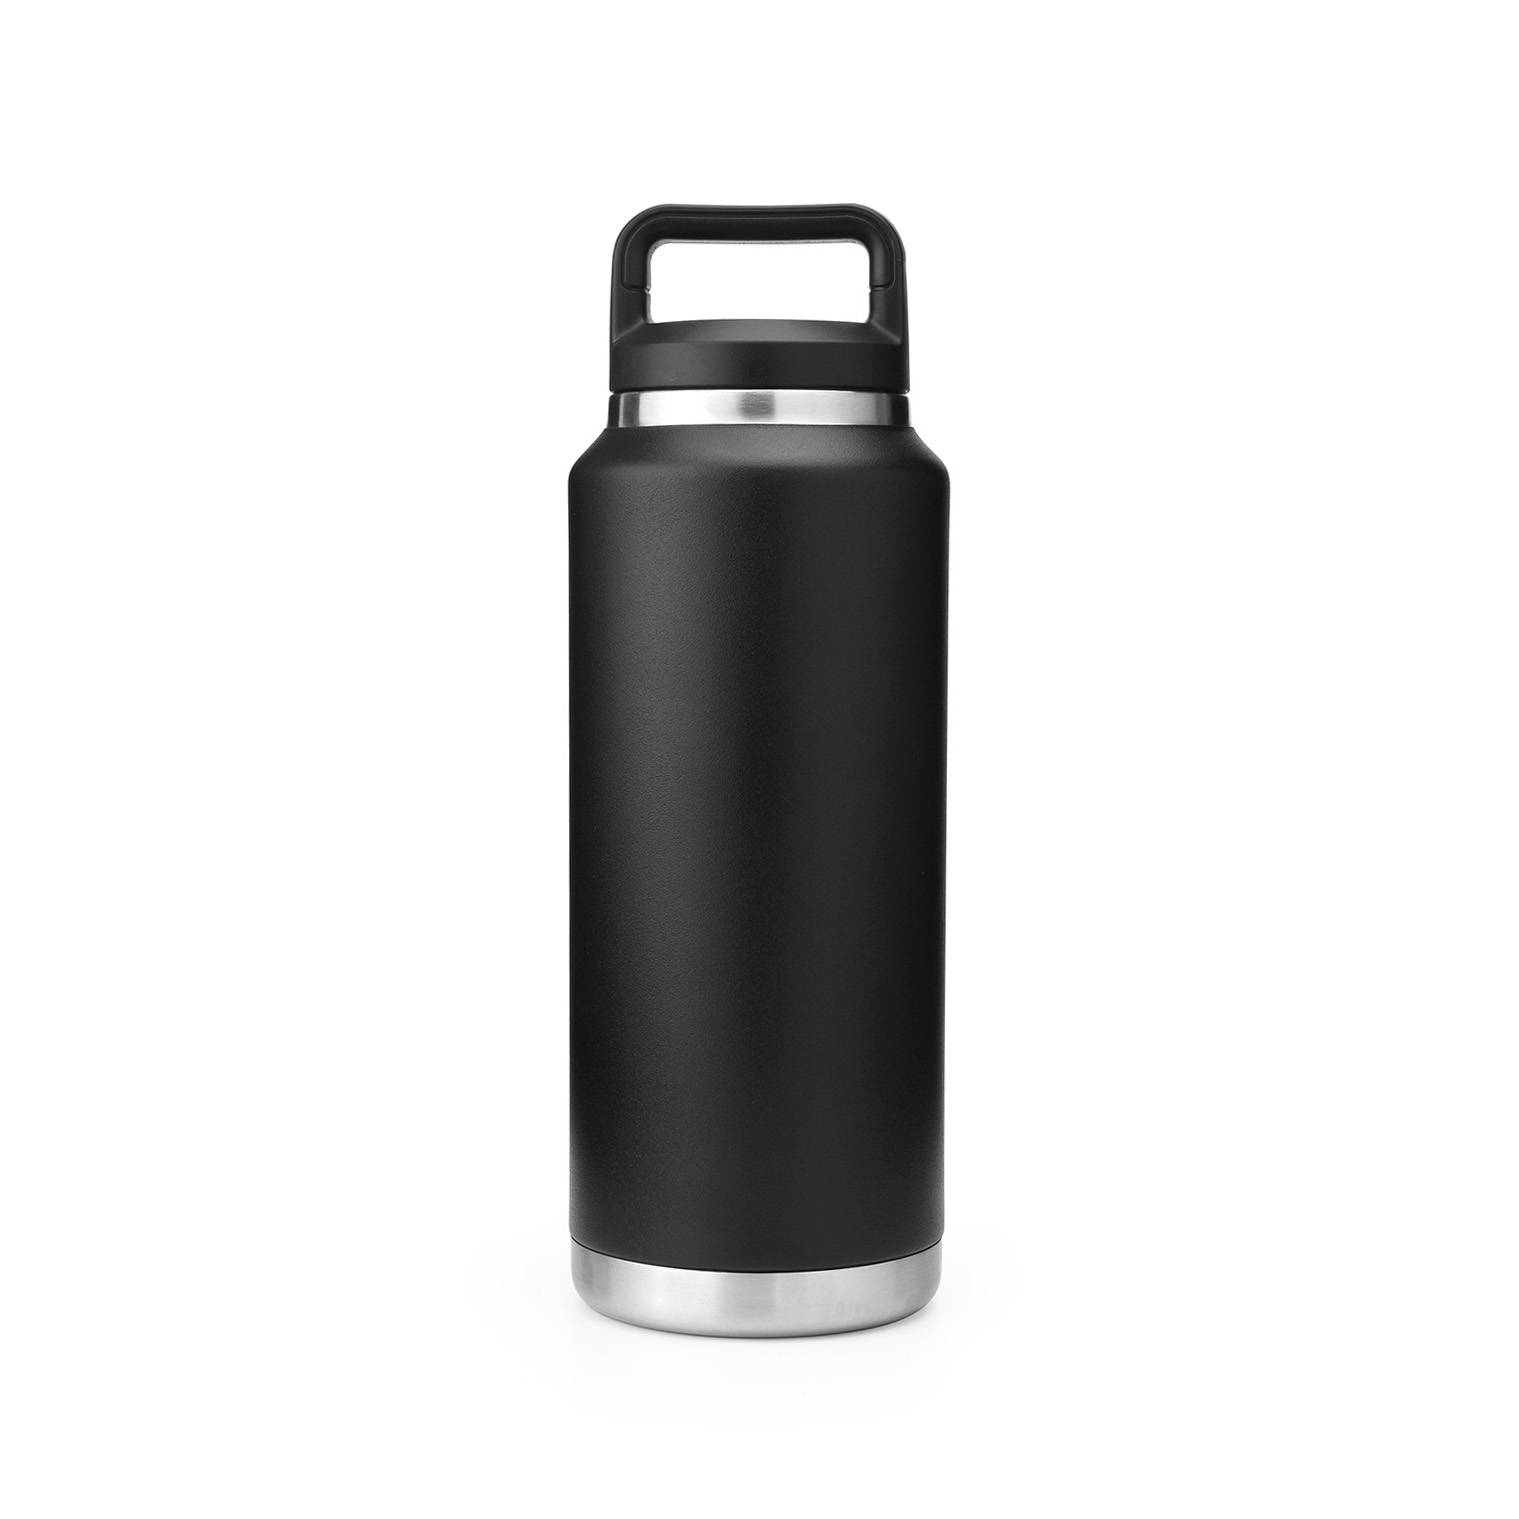 Aoibox 14 Oz. Insulated Black Stainless Steel Tumbler with Lid and